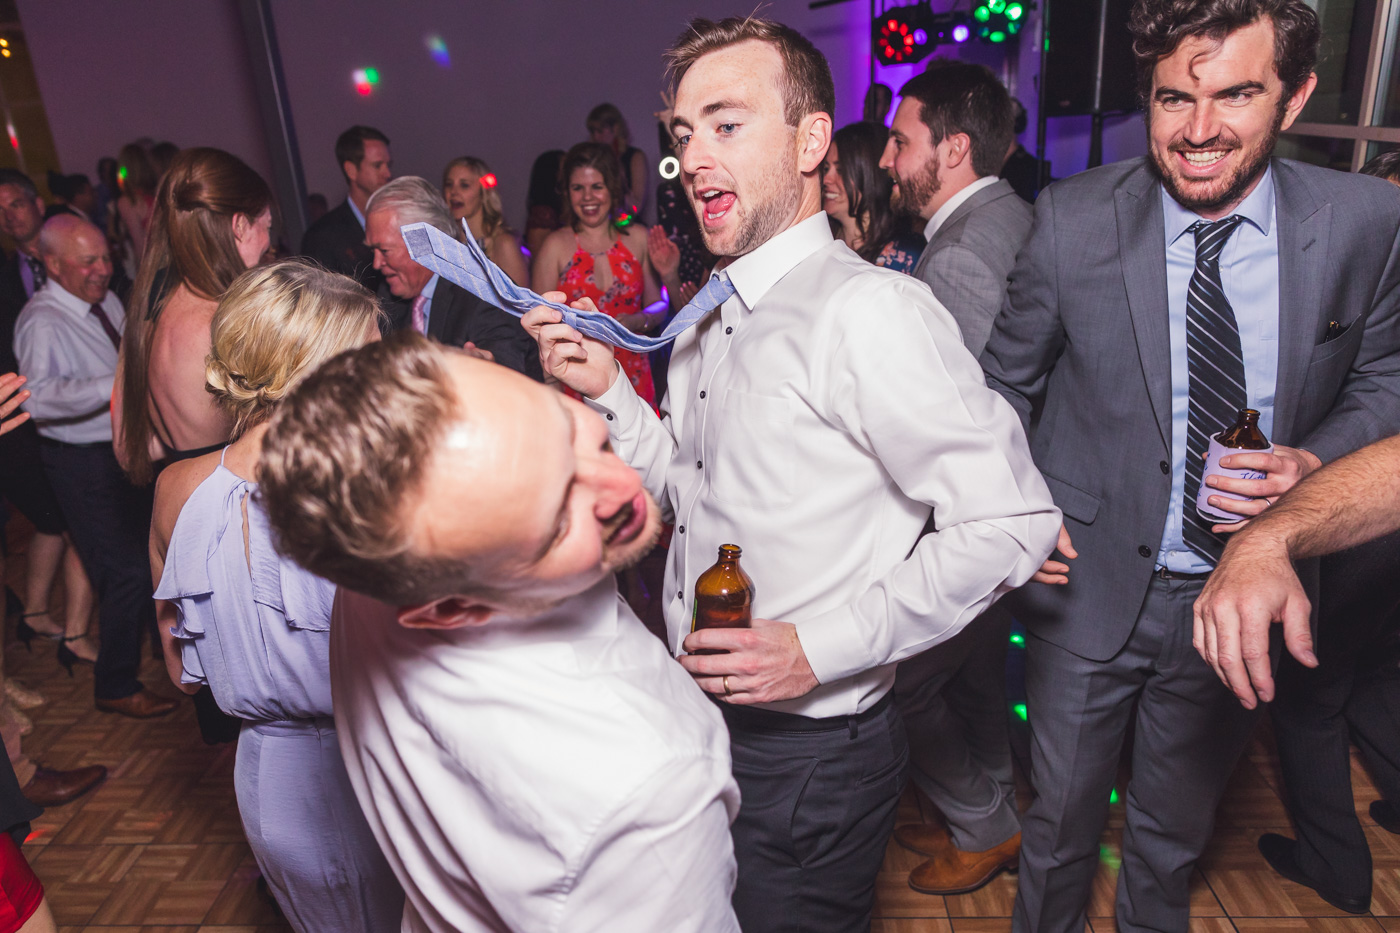 slapping-another-wedding-guest-with-tie